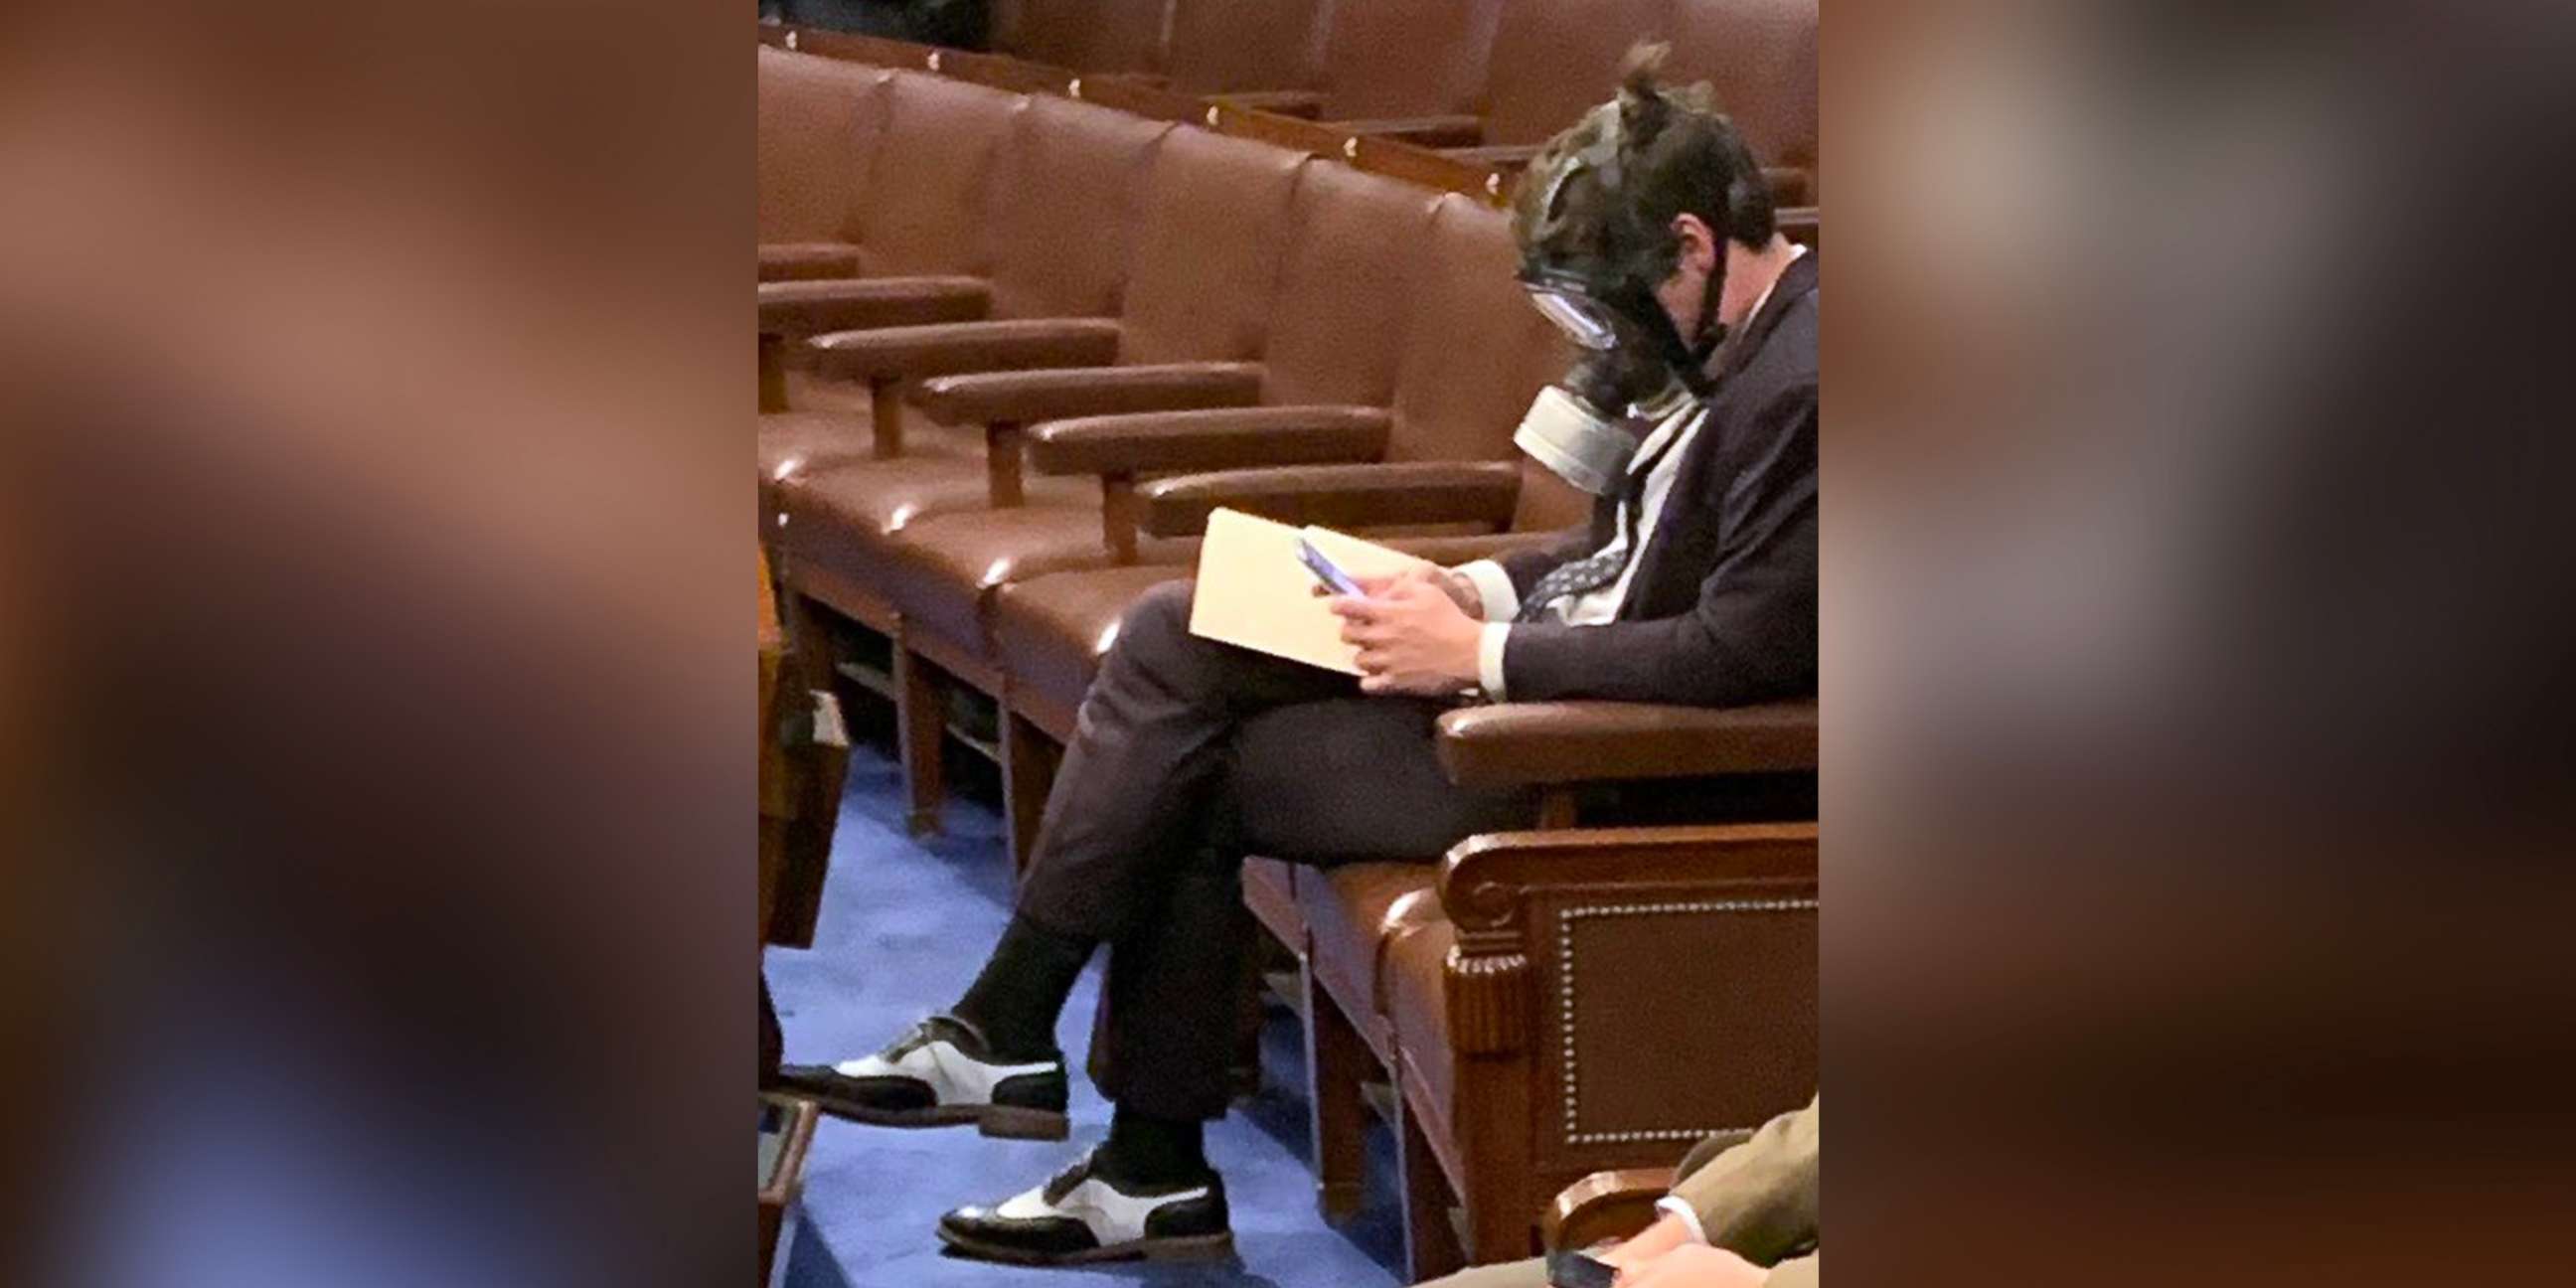 PHOTO: Rep. Matt Gaetz wears a gas mask on the House floor in Washington during a vote on coronavirus emergency funding, in a photo posted to Twitter by Rep. Jim Himes on March 4, 2020.